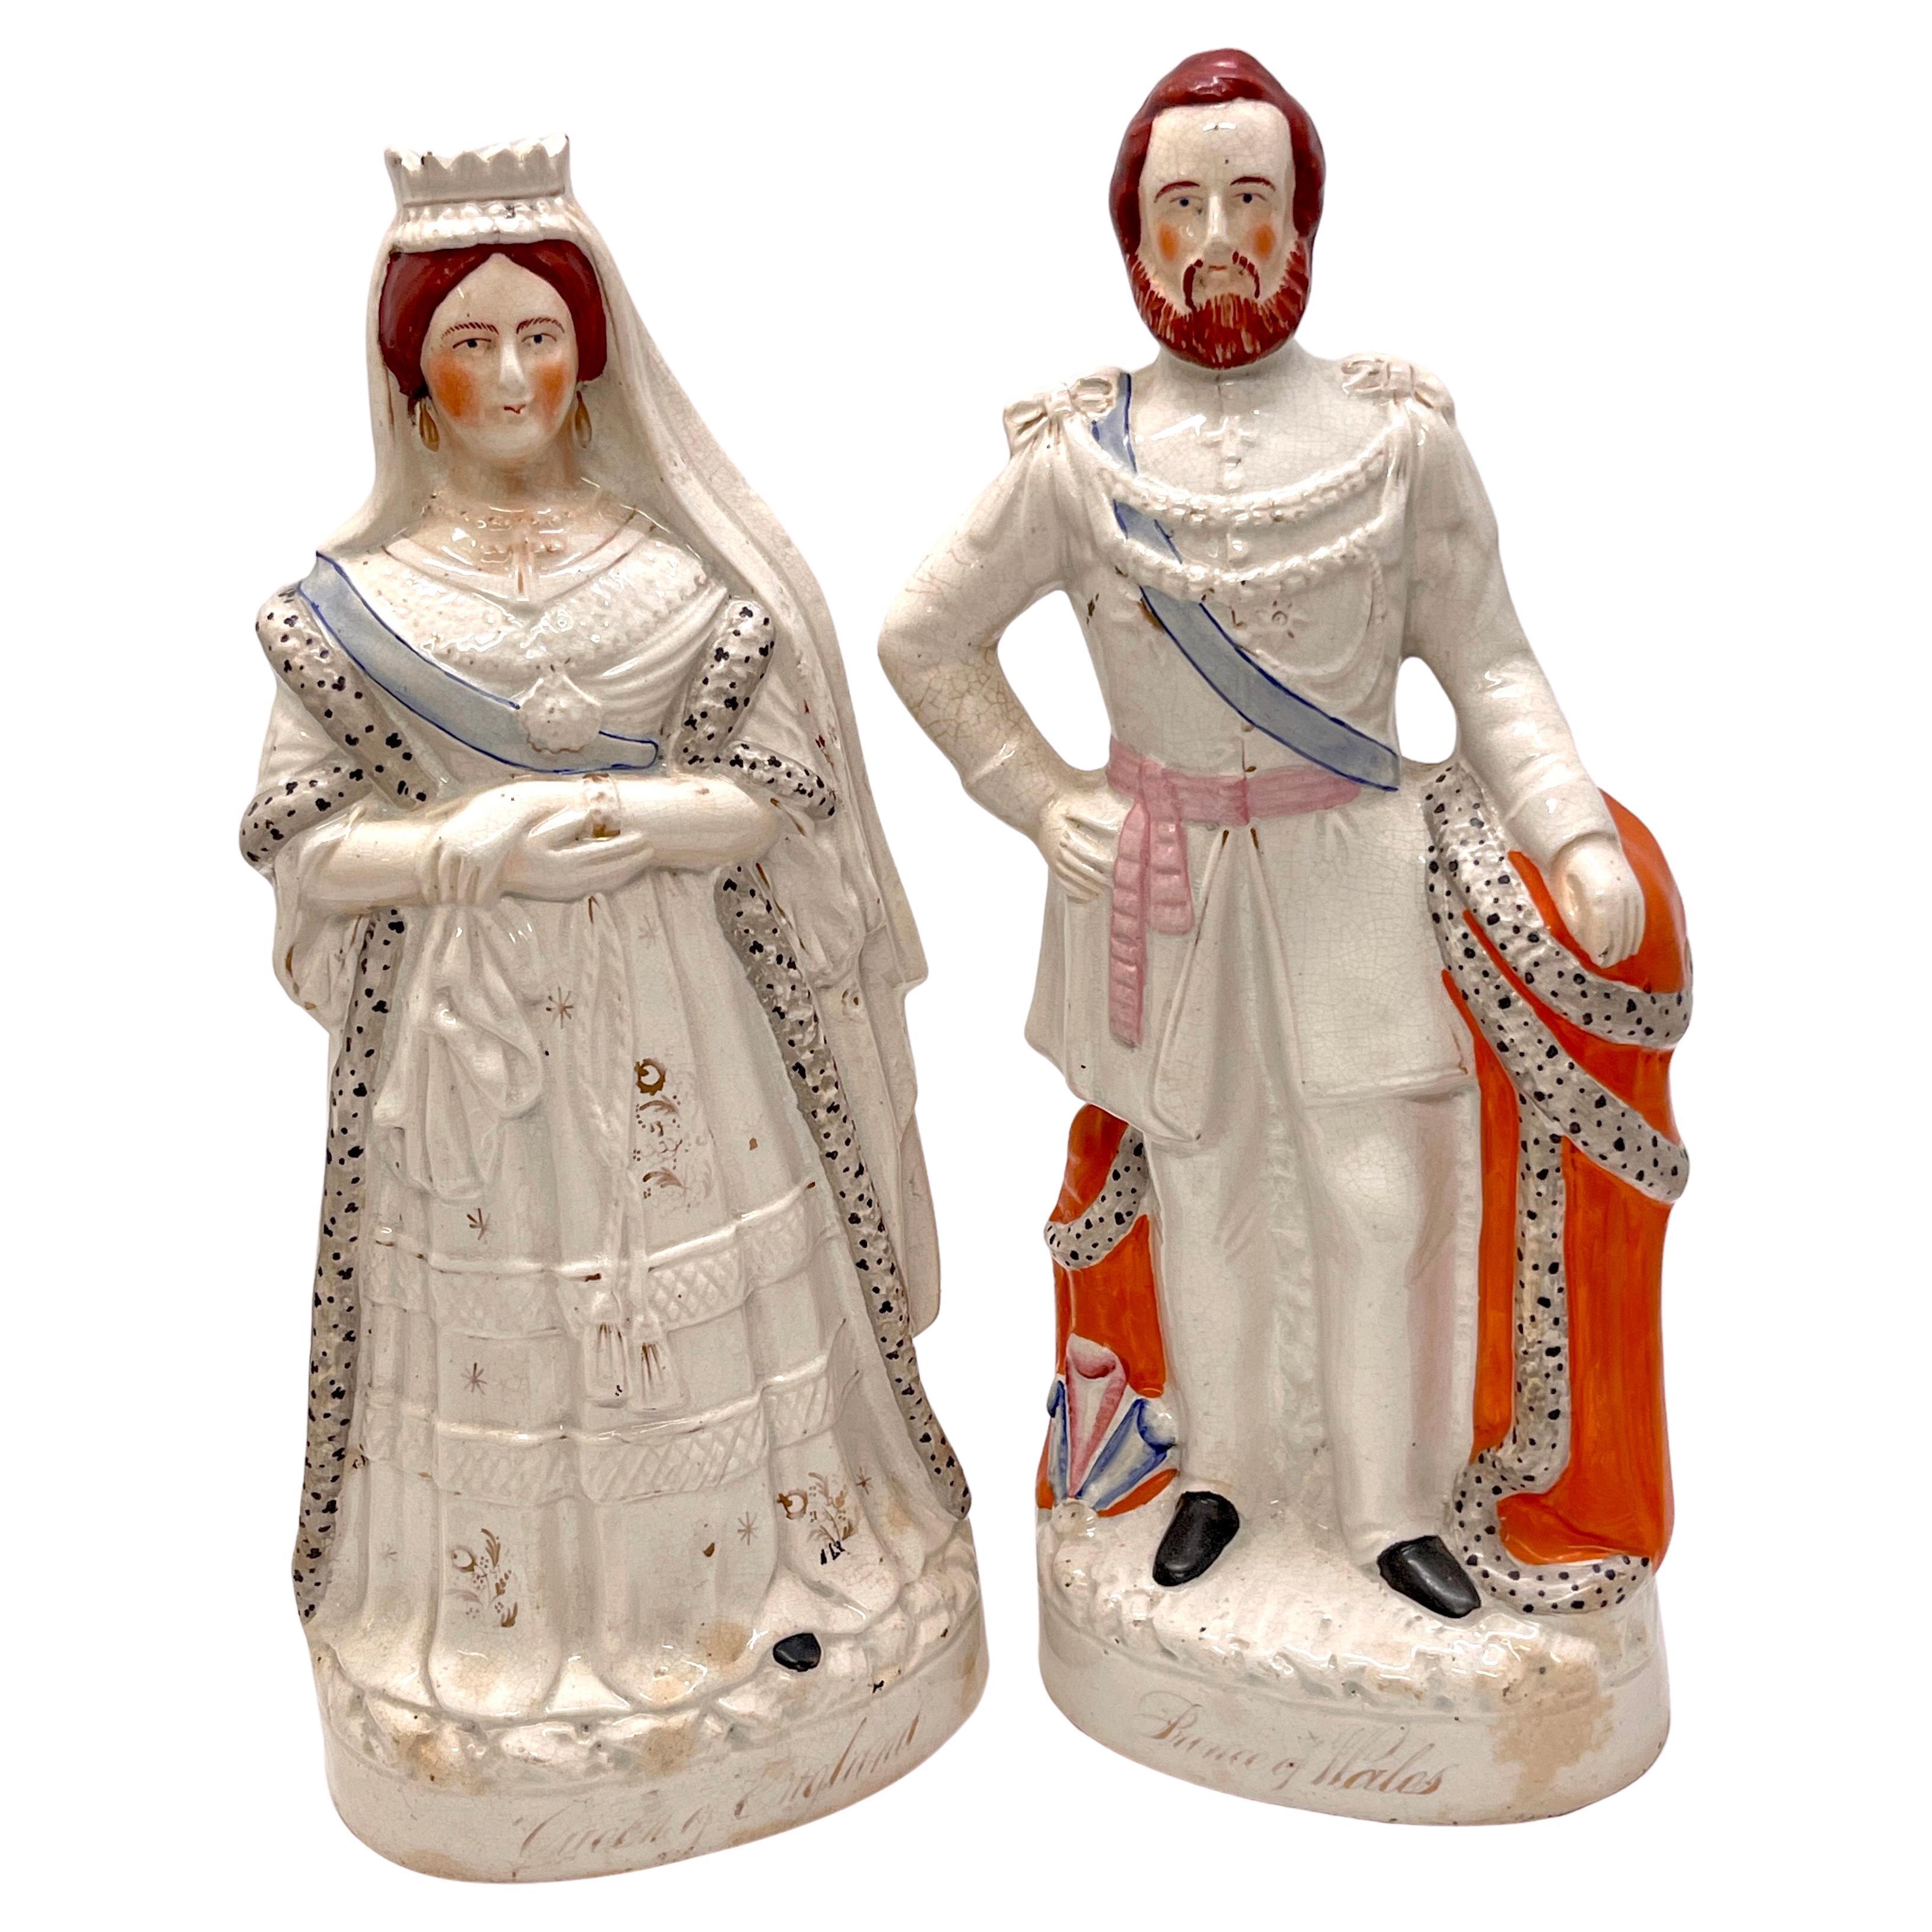 19th Century Staffordshire Figurines of Queen Victoria and Prince Albert 'Large' For Sale